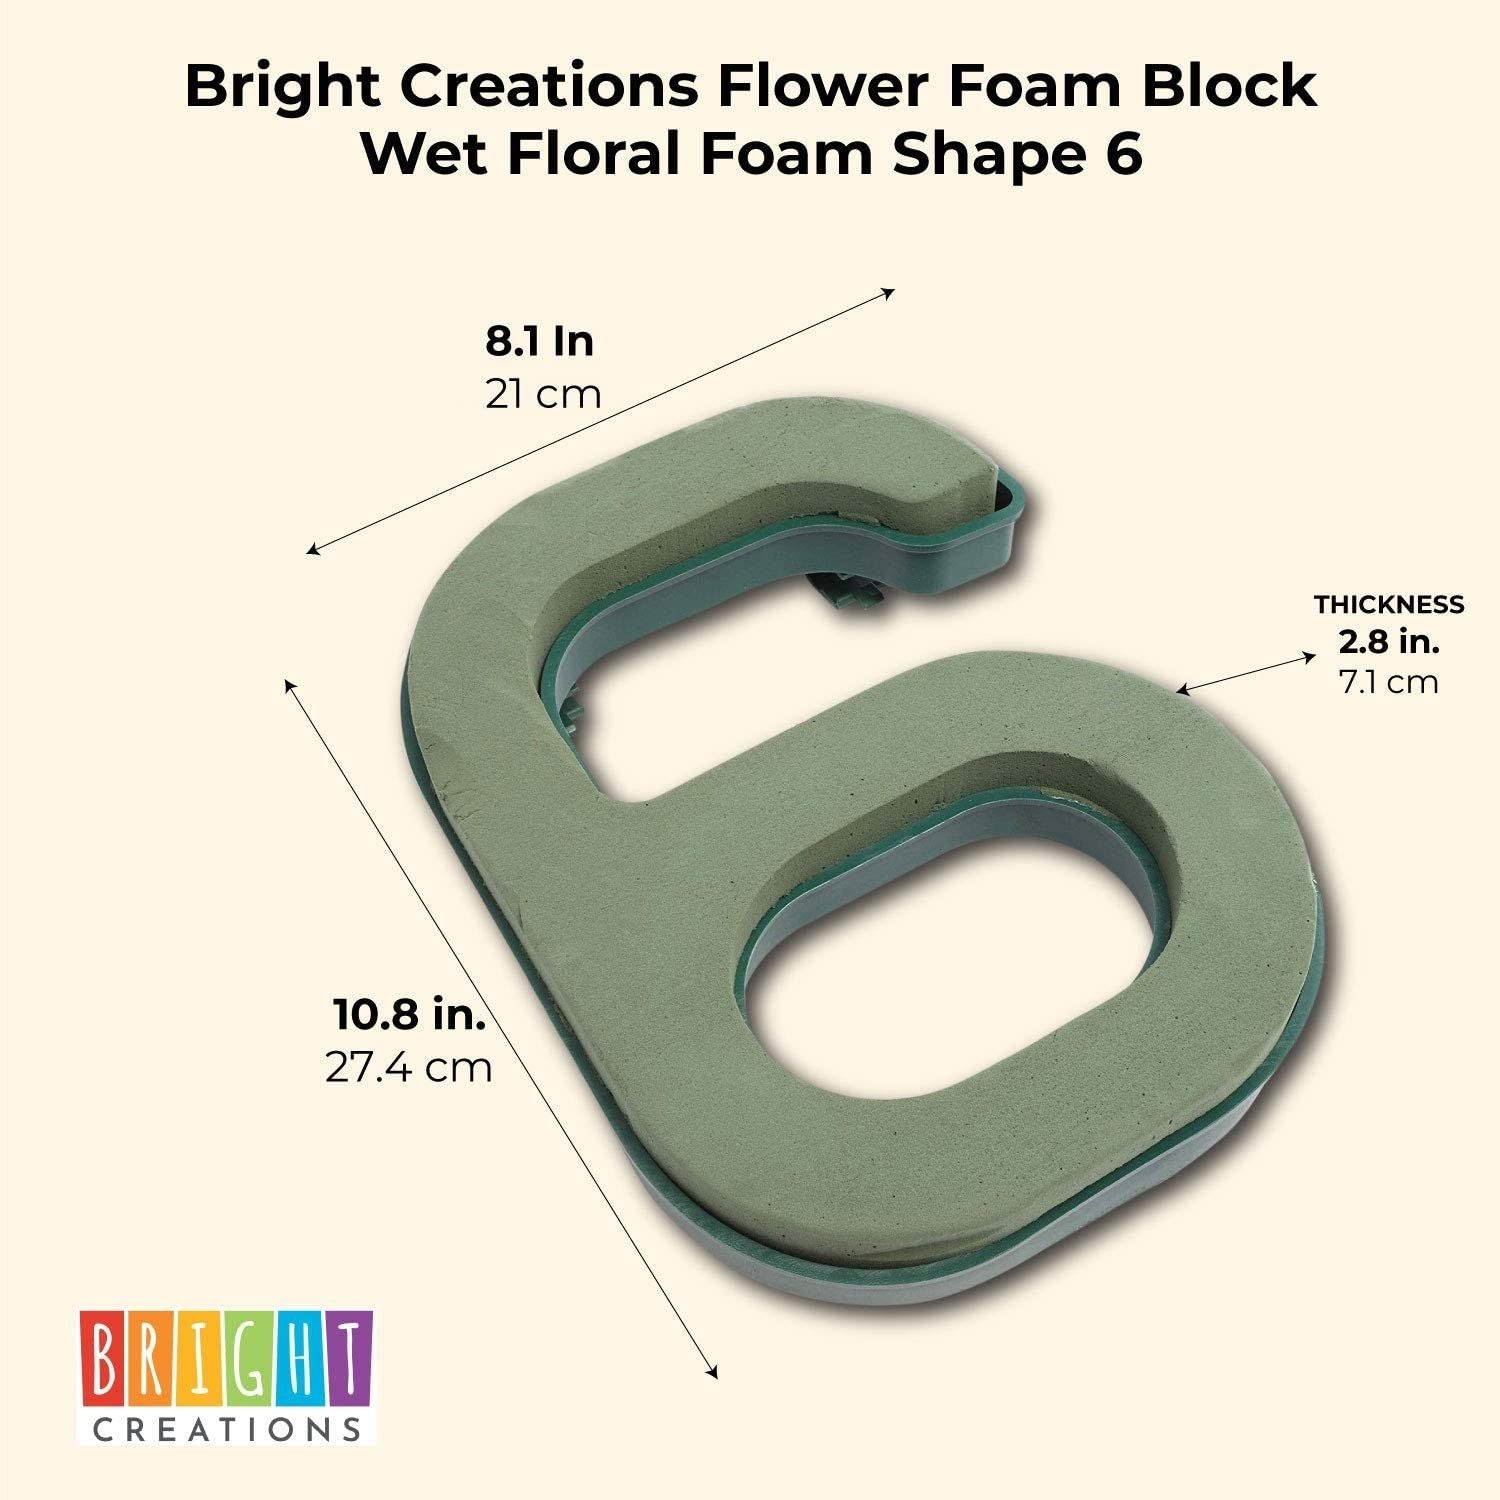 Bright Creations Number 6 Foam for Fresh Flowers, Floral Arrangement Supplies for Crafts, Decorations, Green, 11 x 8 in